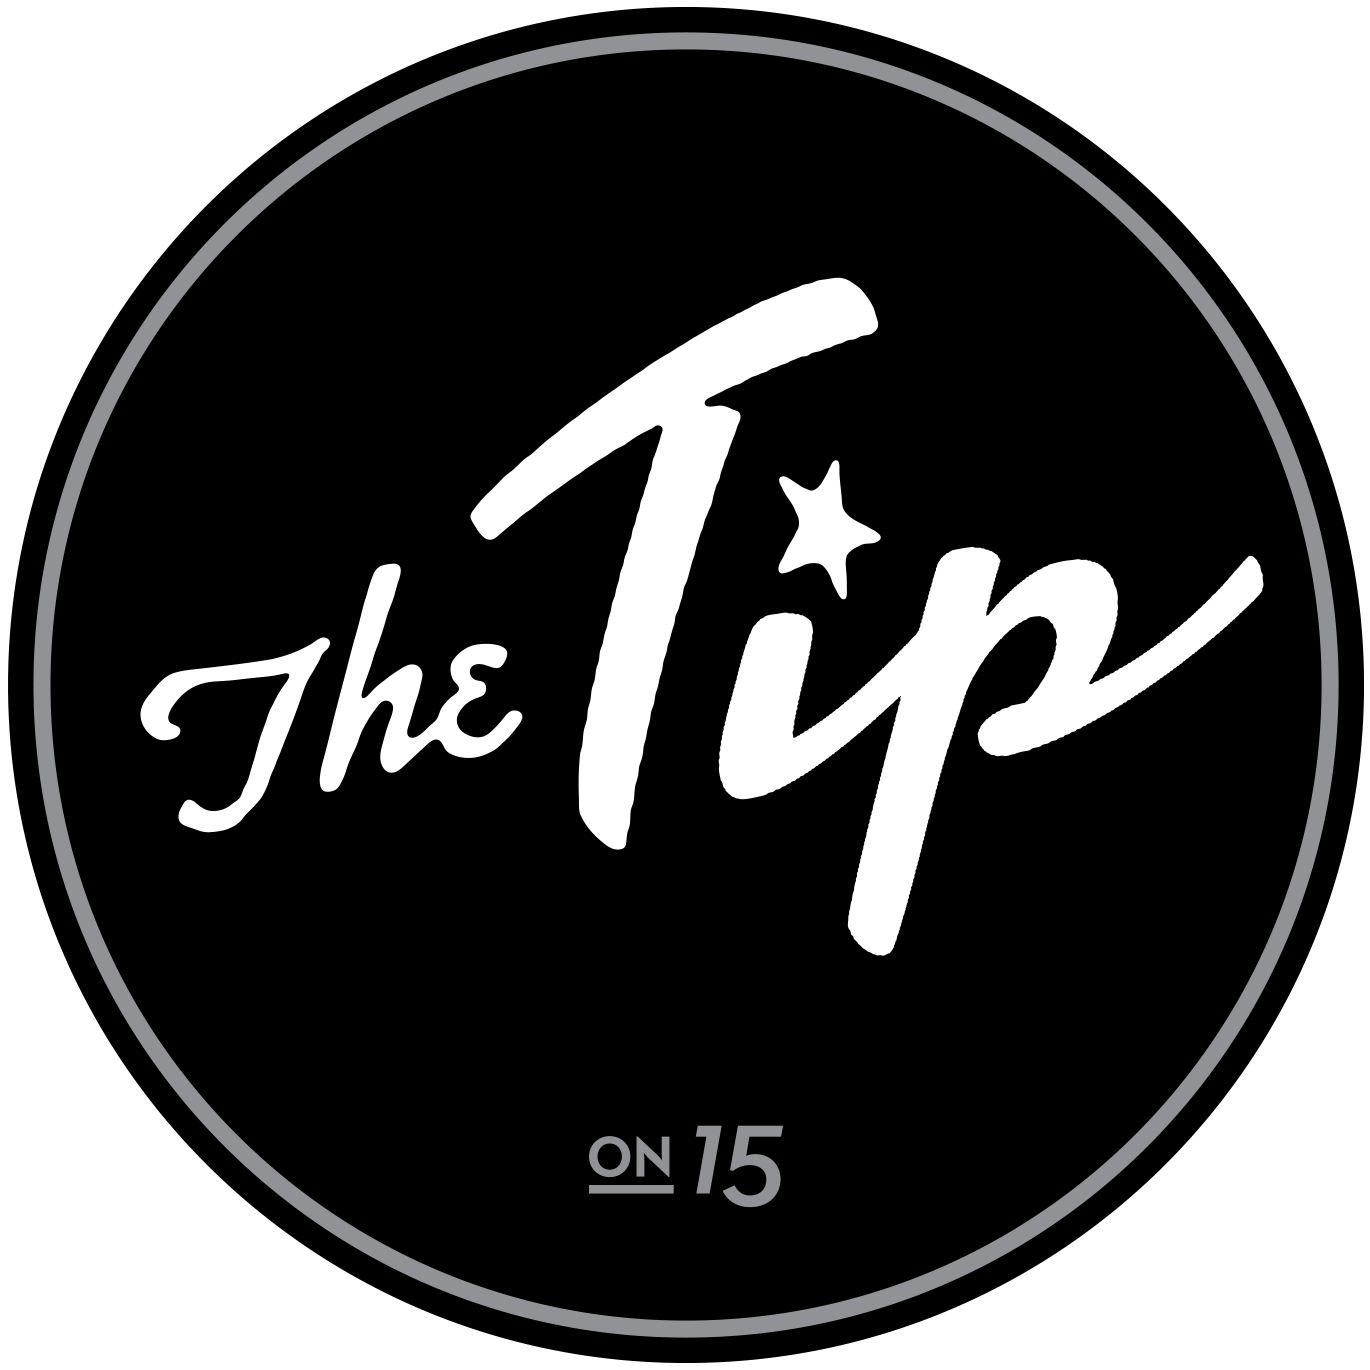 The Tip